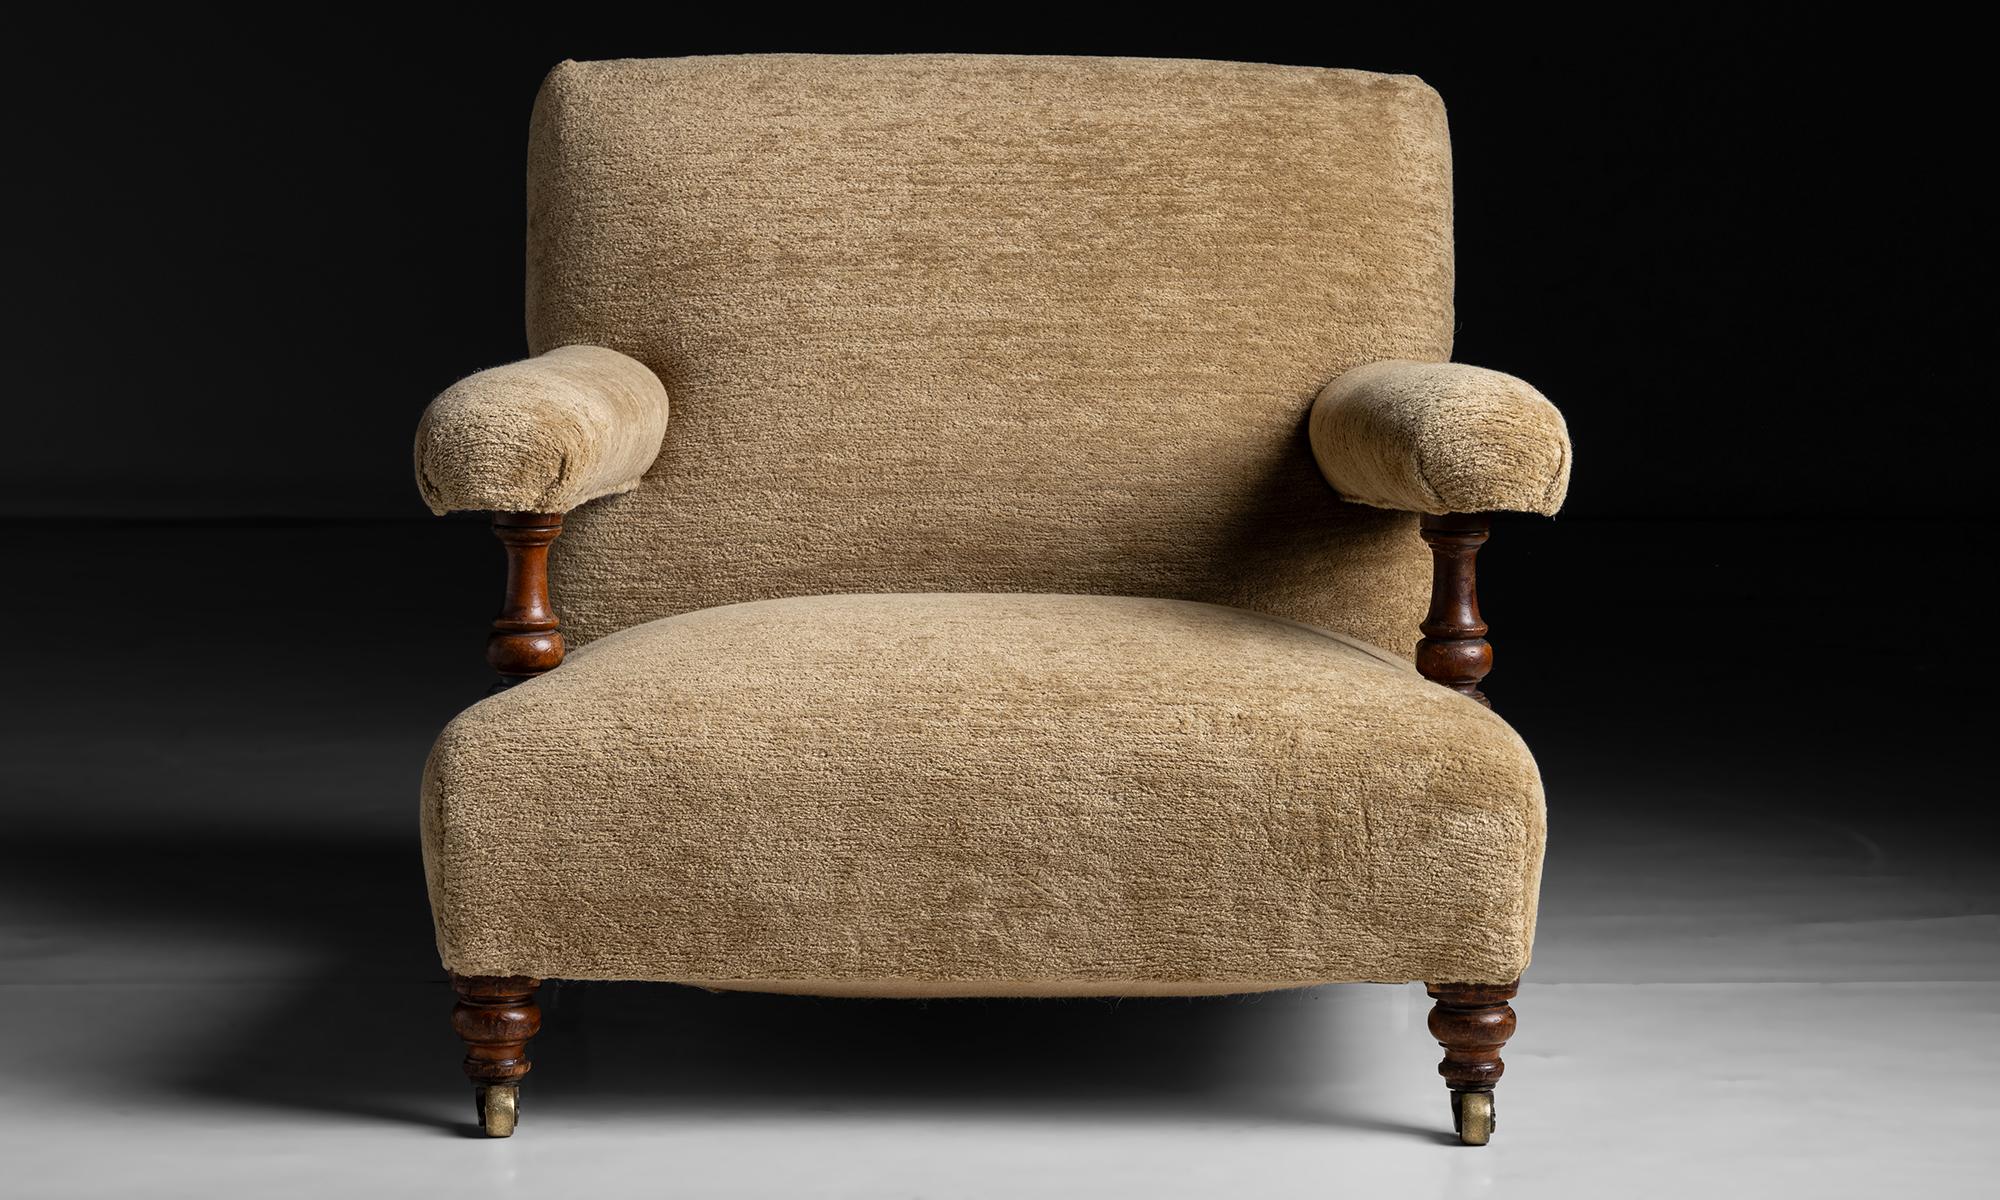 Upholstery Howard & Sons Open Armchair in Chenille by Pierre Frey, England circa 1850